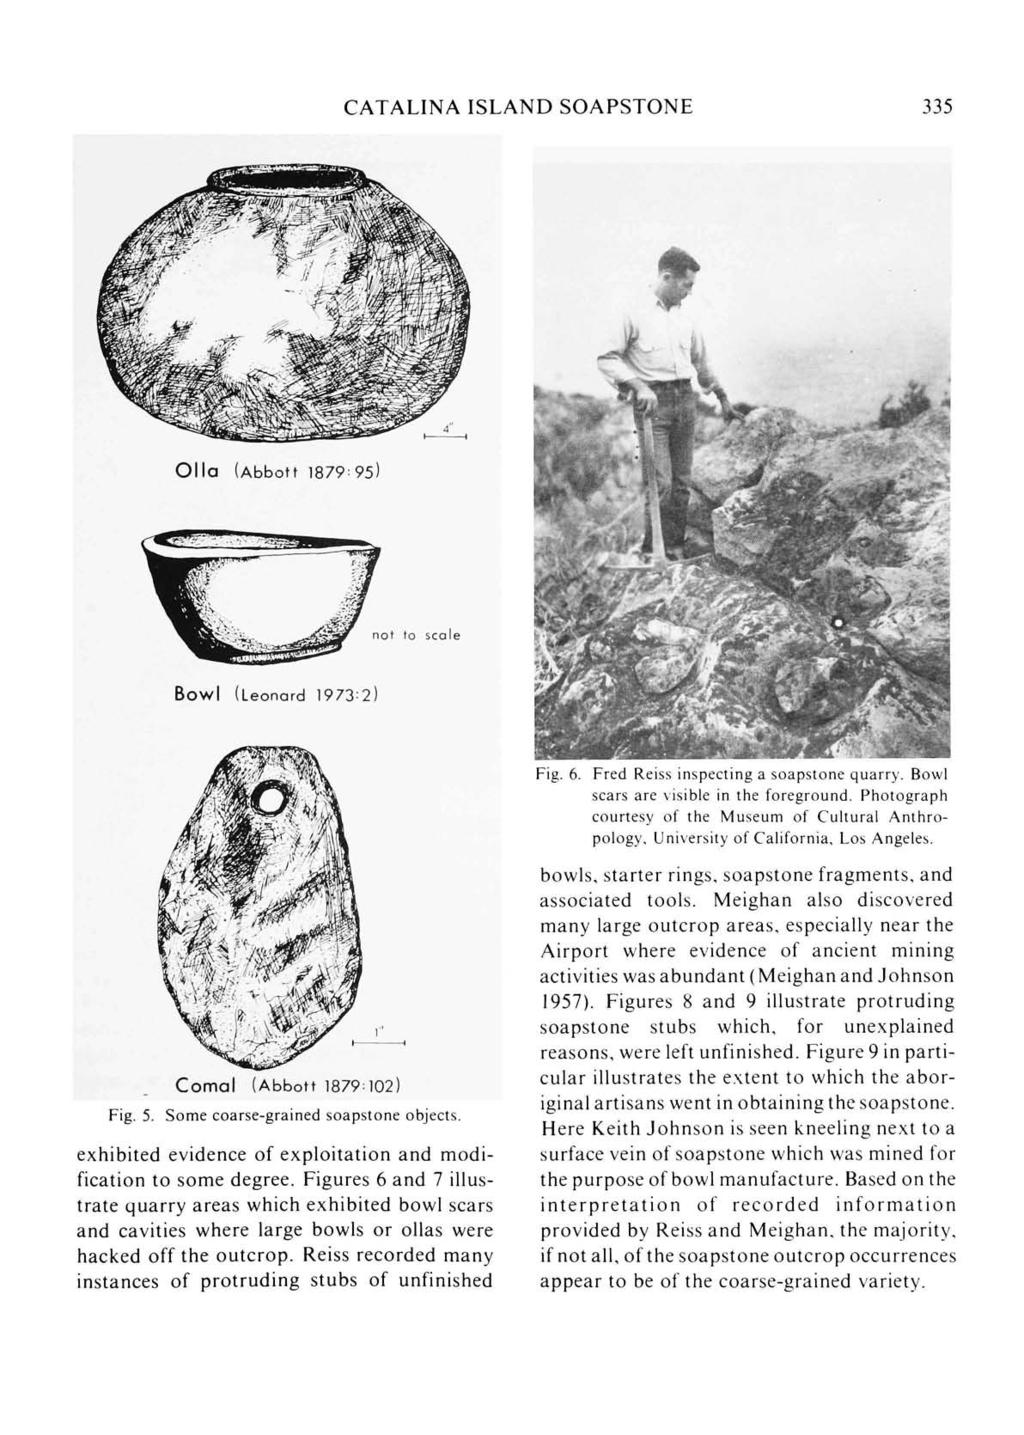 CATALINA ISLAND SOAPSTONE 335 Olla (Abbott 187995) not to scale Bowl (Leonard 1973:2) Fig. 6. Fred Reiss inspecting a soapstone quarry. Bowl scars are visible in the foreground.